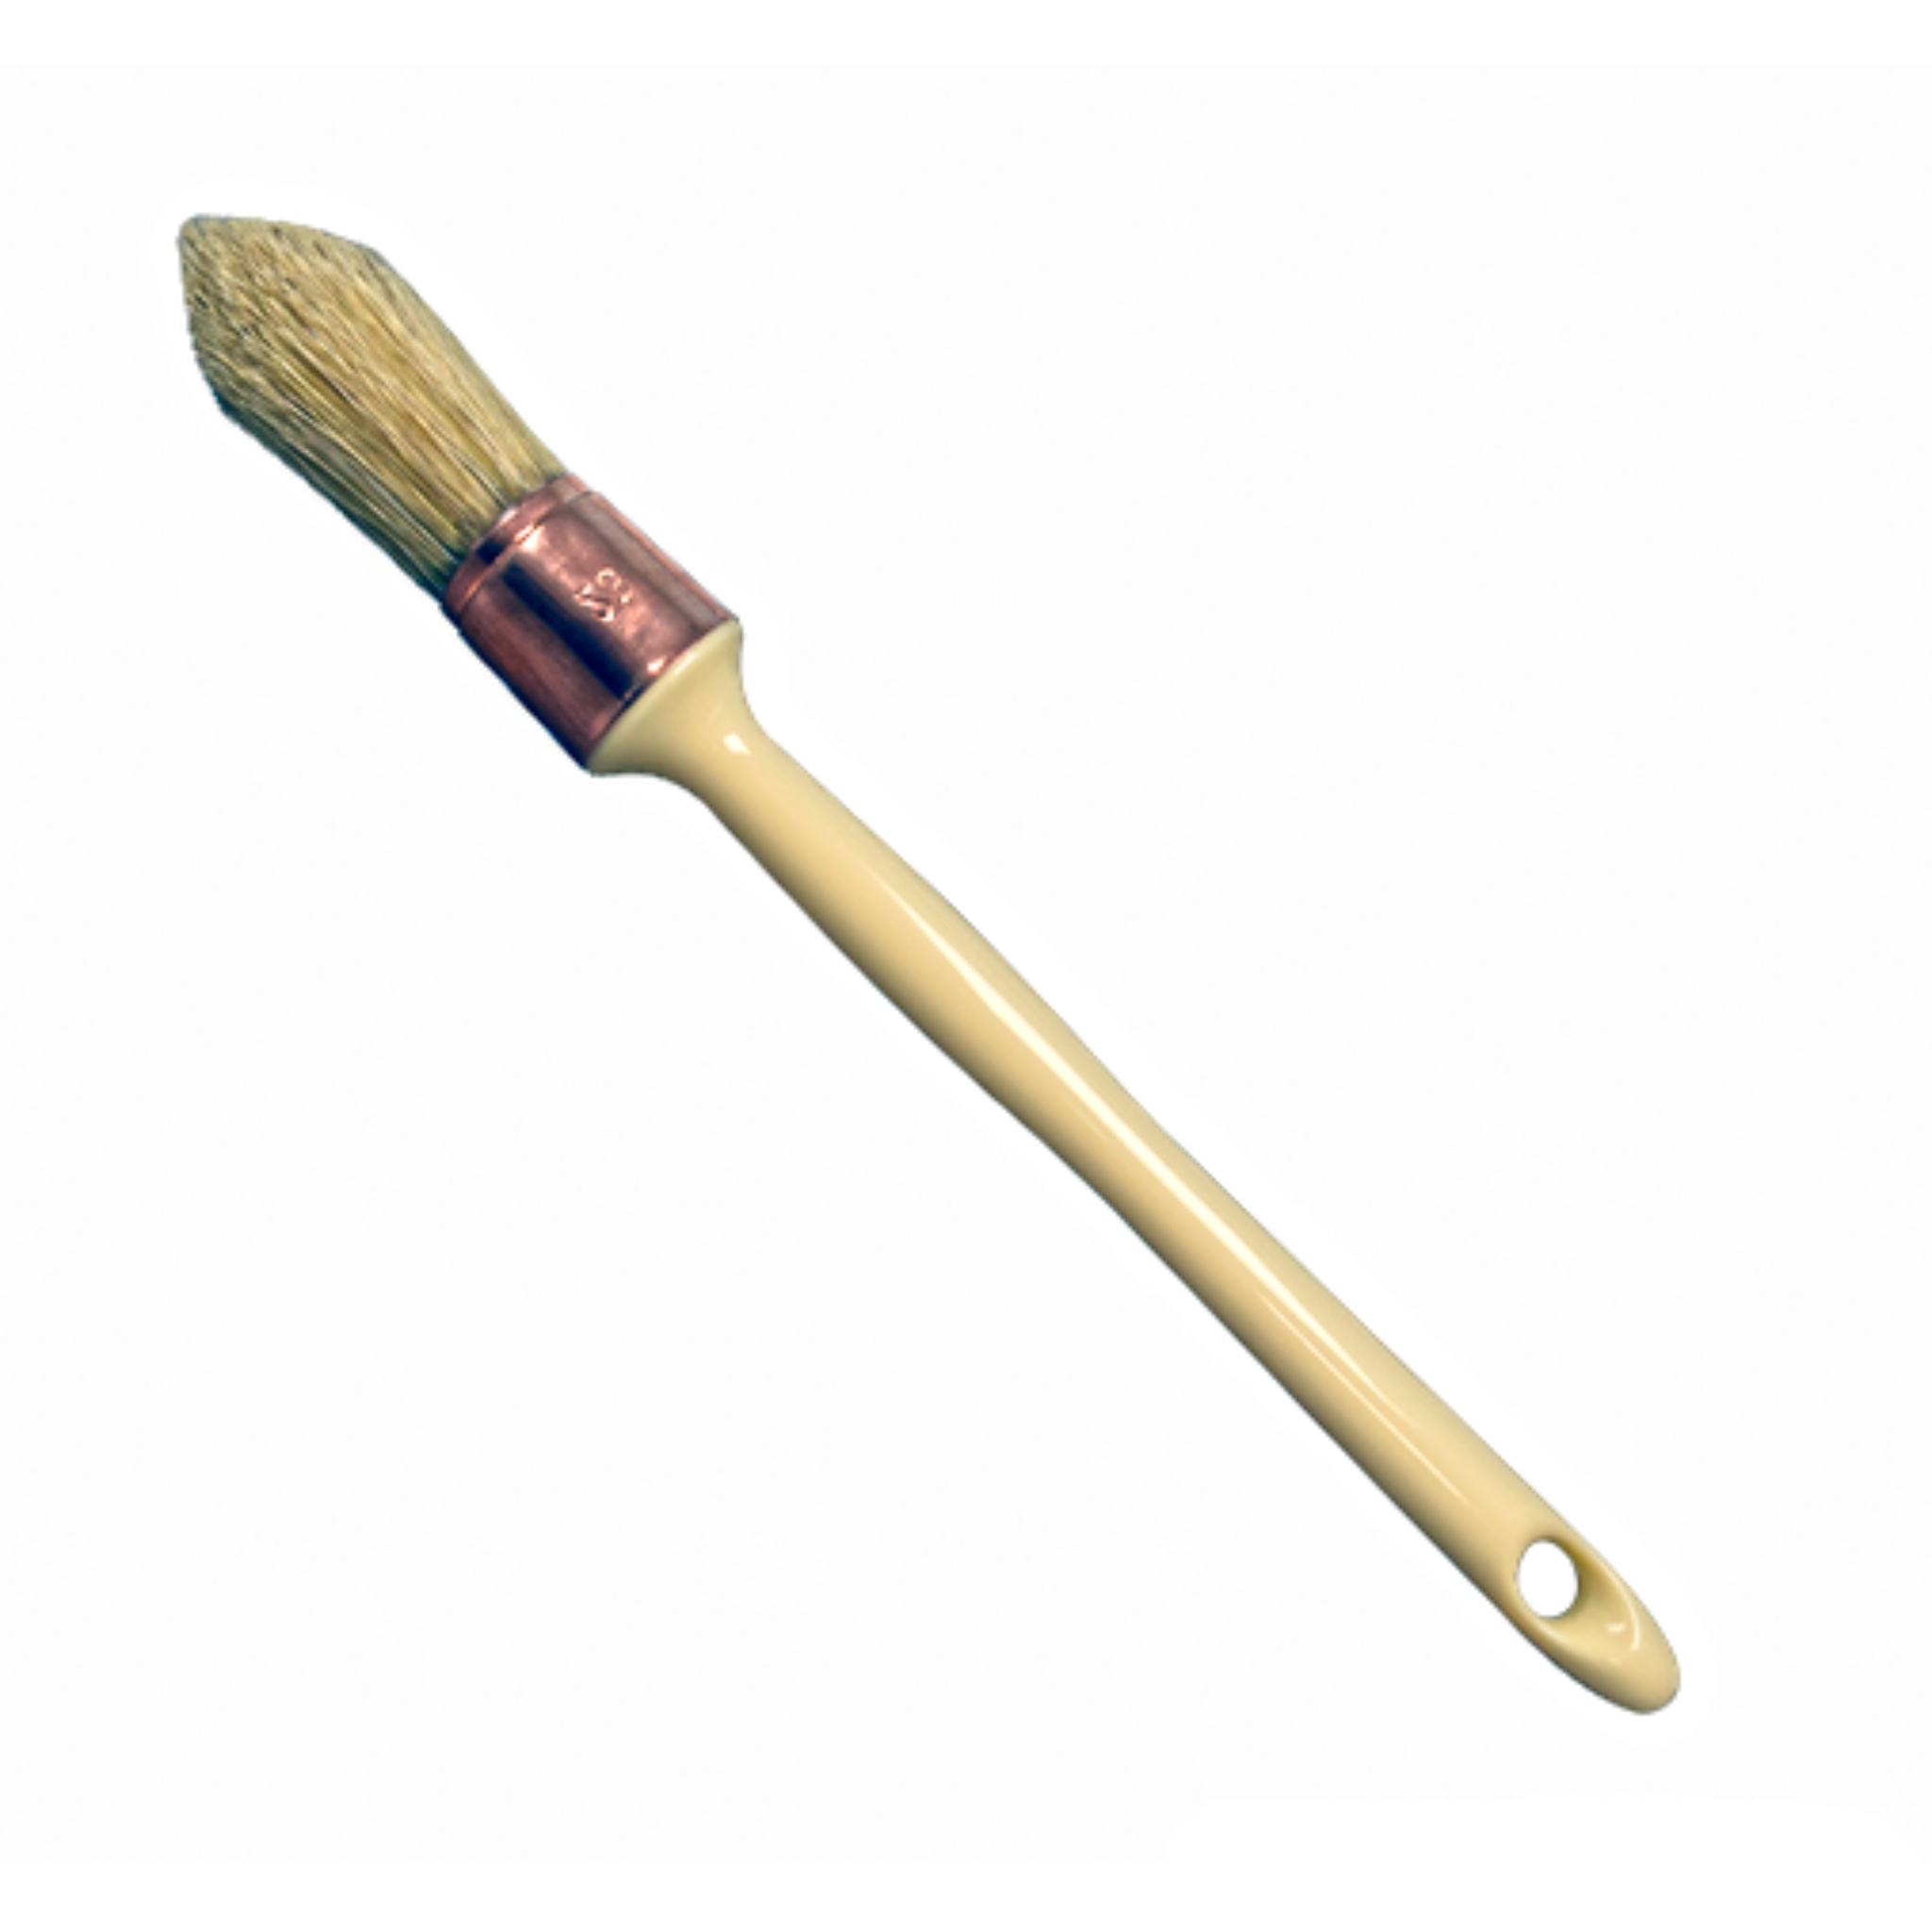 Dixie Belle's French Tip Paint Brush is against a white background. This brush has natural bristles and is shaped to help reach the fine-detailed areas on your furniture projects.